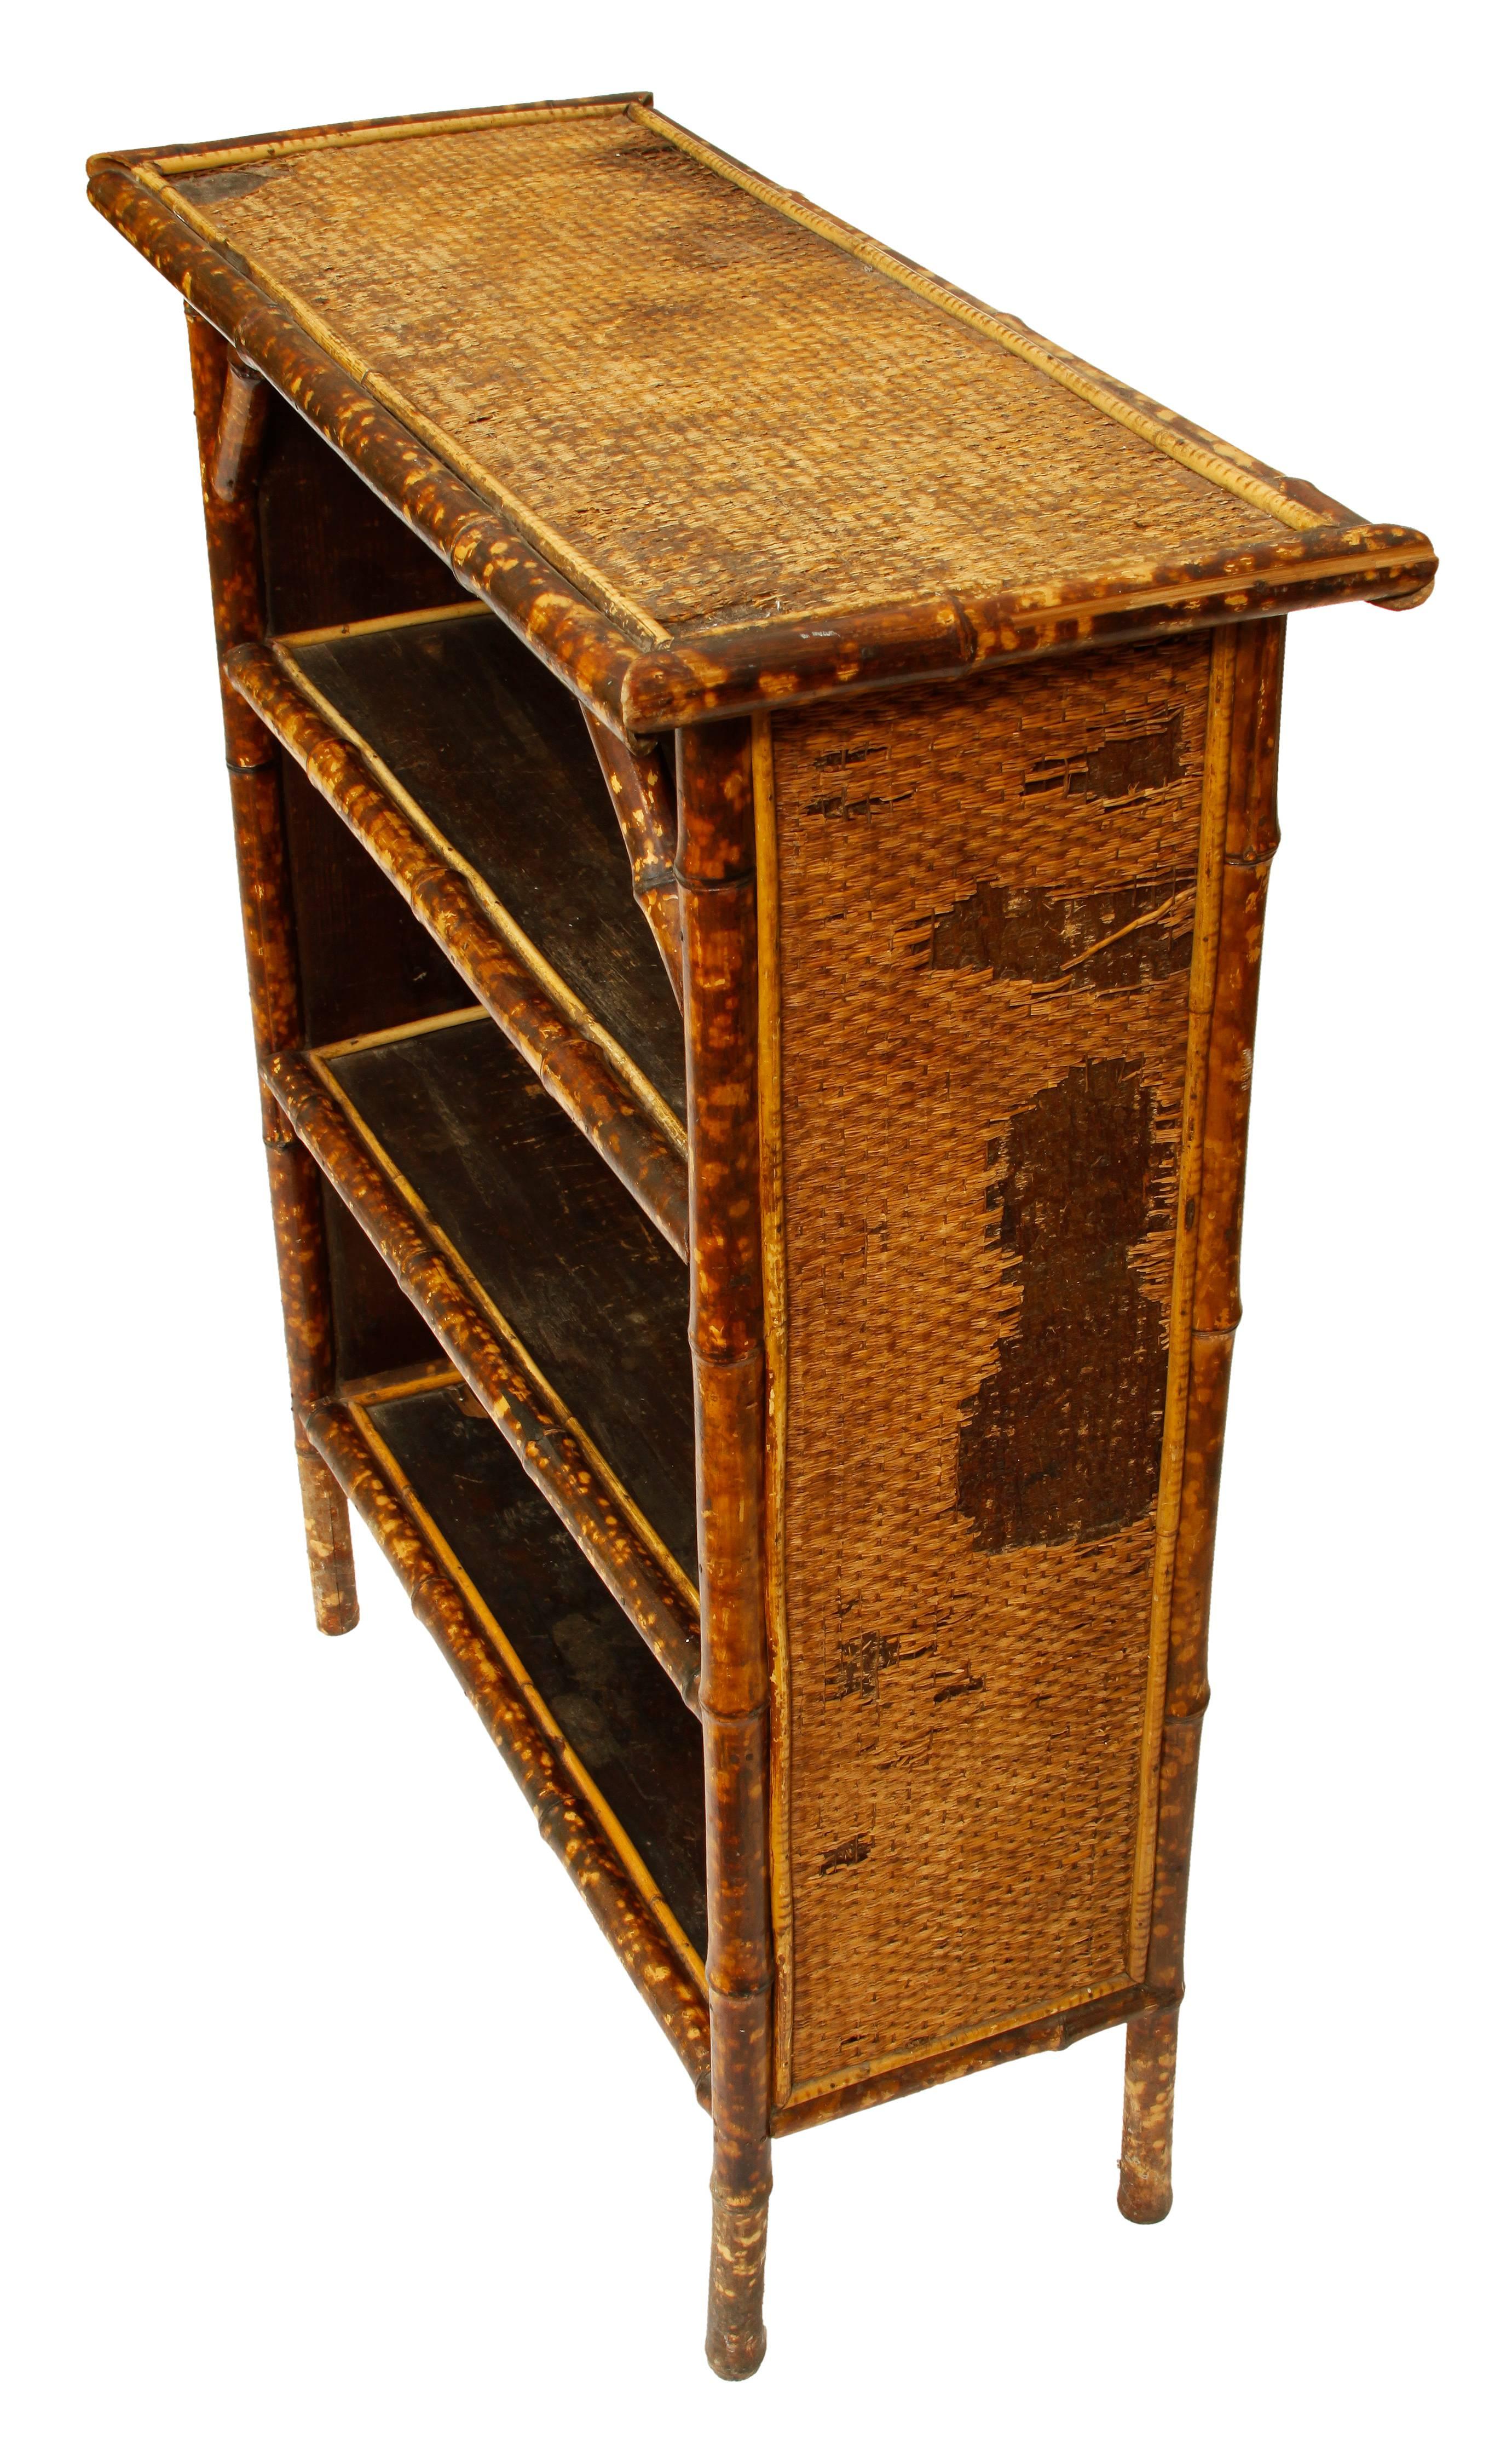 A small charming piece in bamboo with original grasscloth top, this is a perfect spot for books or accessories.